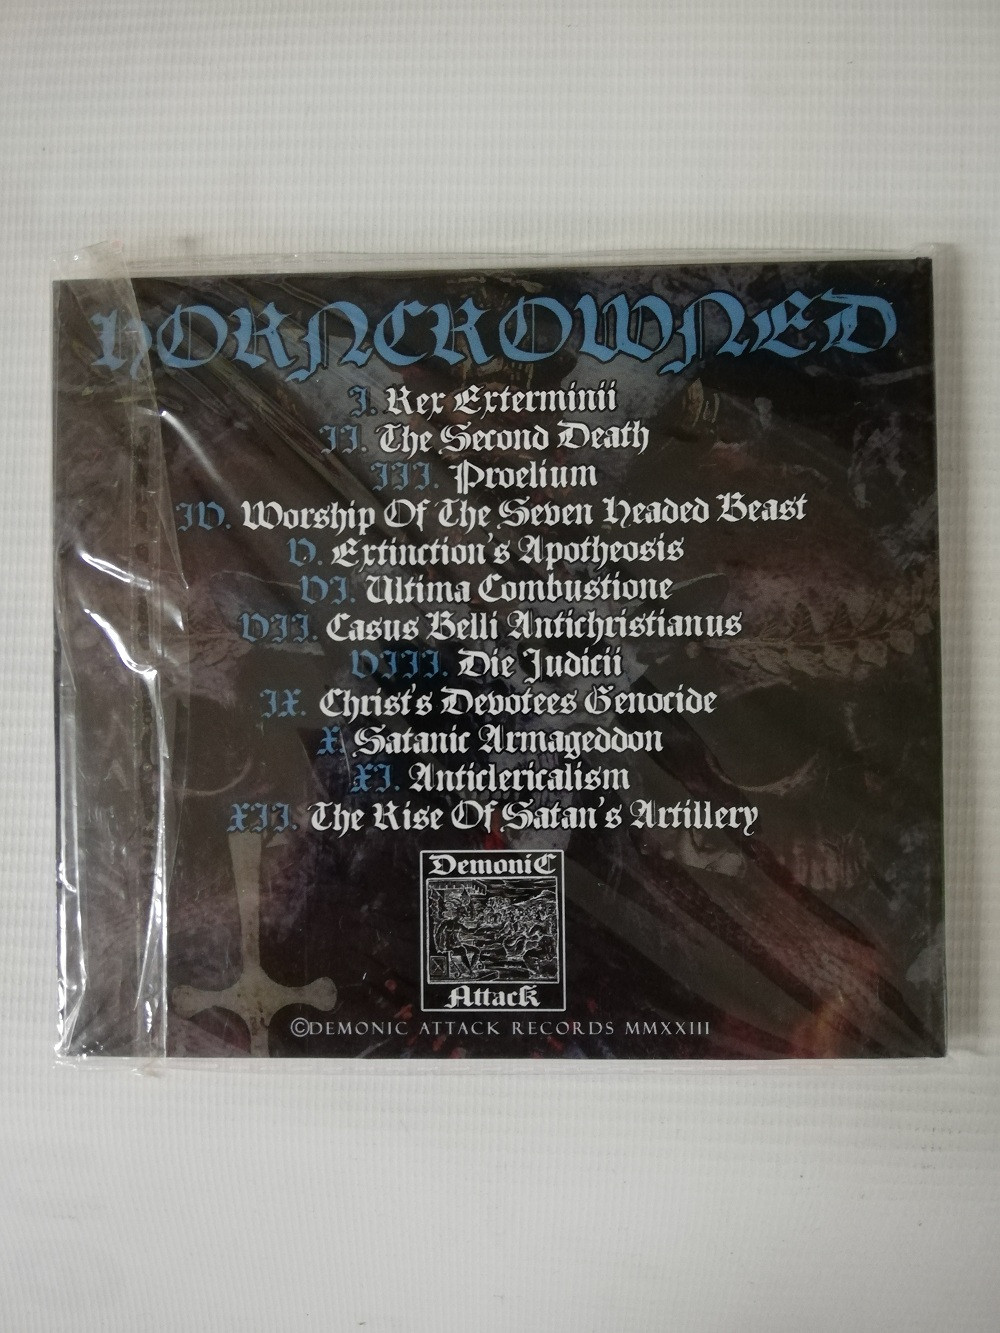 Imagen CD HORNCROWNED - MAGNA TORMENTORUM (20 YEARS OF EXTREME DEVIL´S  WORSHIP) 2